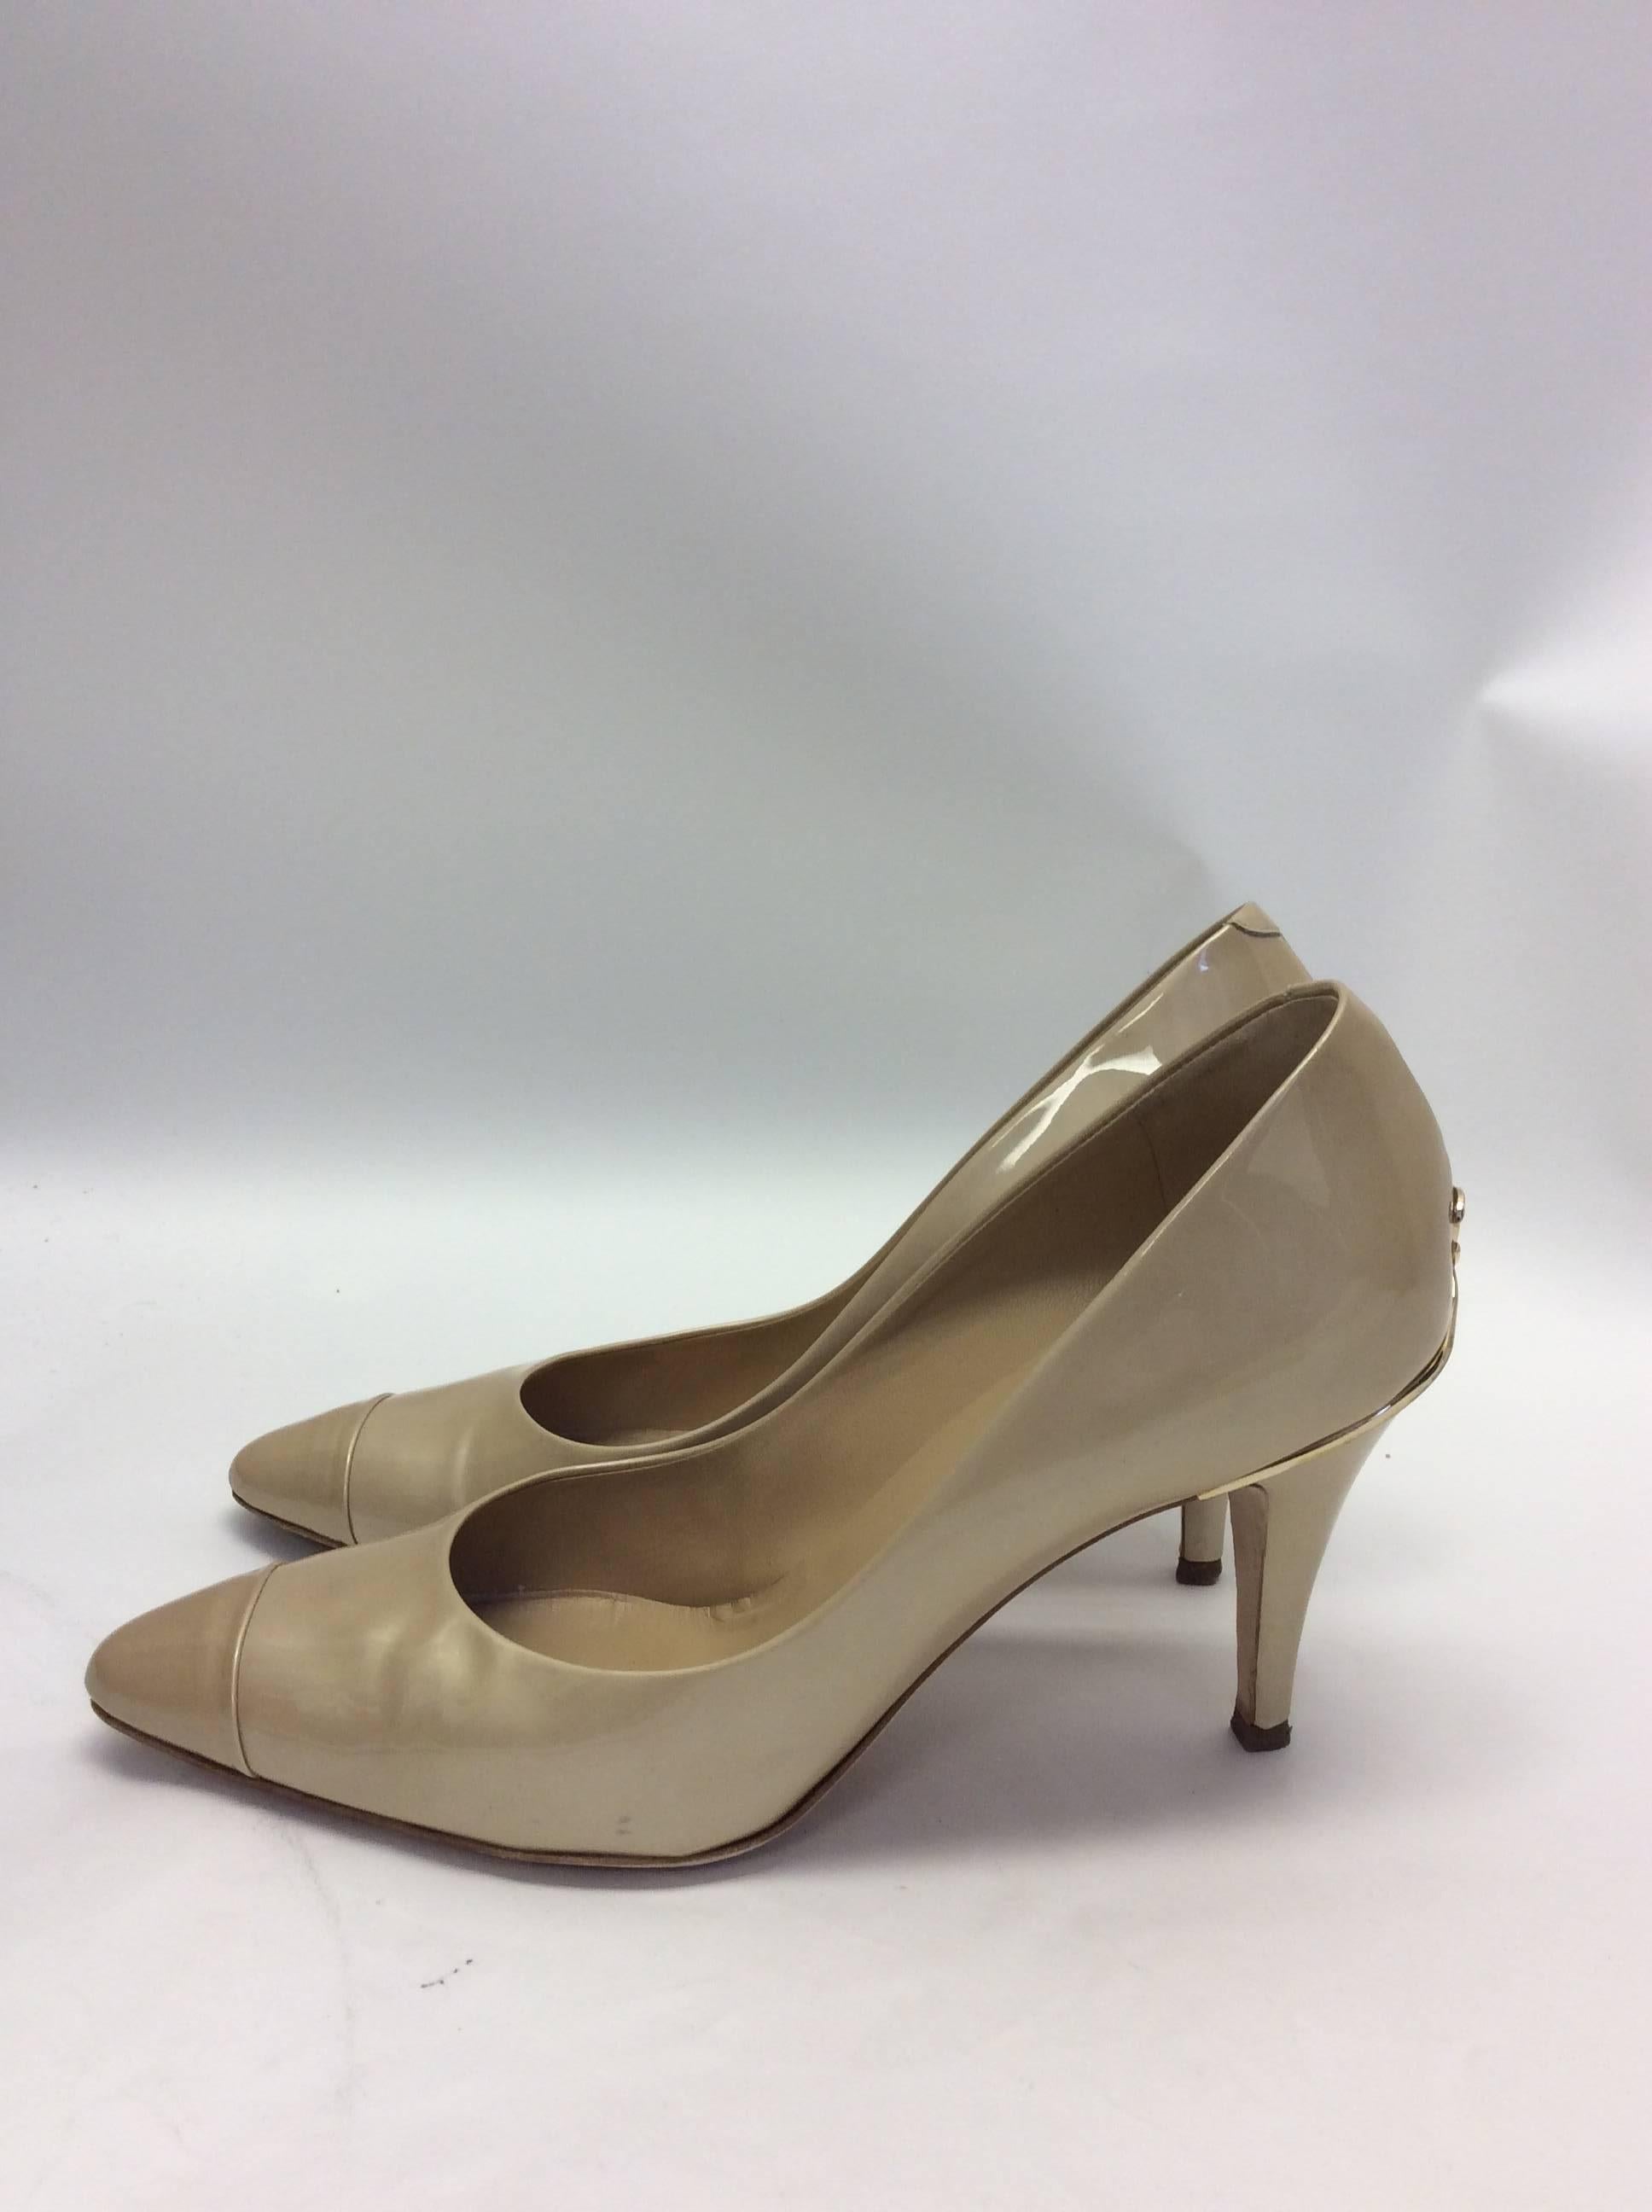 Chanel Patent Leather Cream Pumps
Size 39.5
Original price: $675
3.5 inch heel
Gold metal detail on back of both heels
